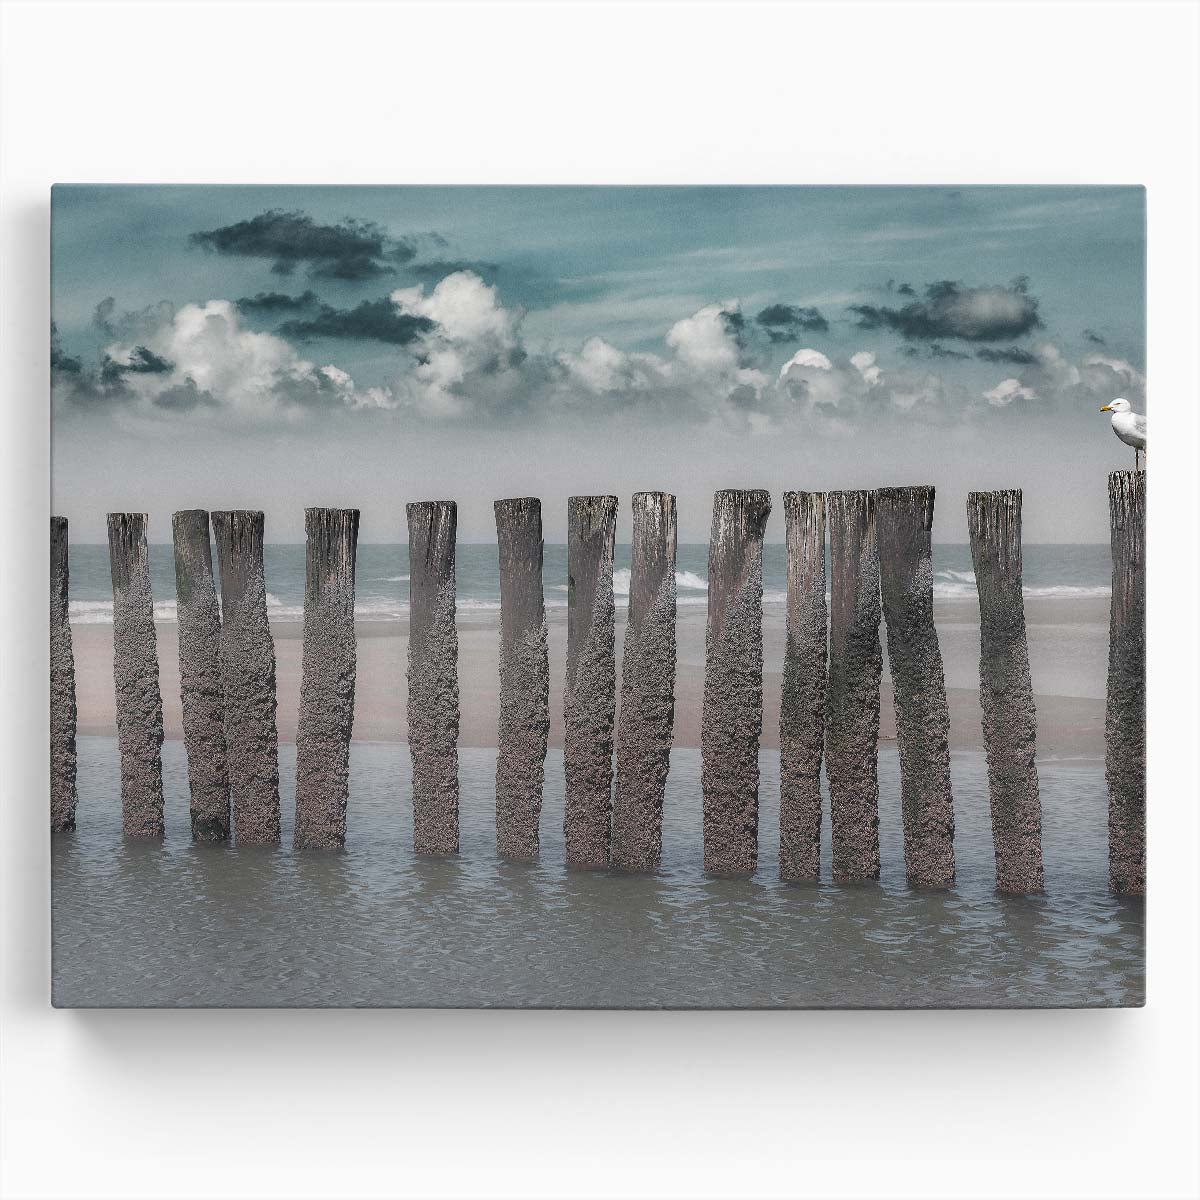 Coastal Dutch Seascape with Seagulls Wall Art by Luxuriance Designs. Made in USA.